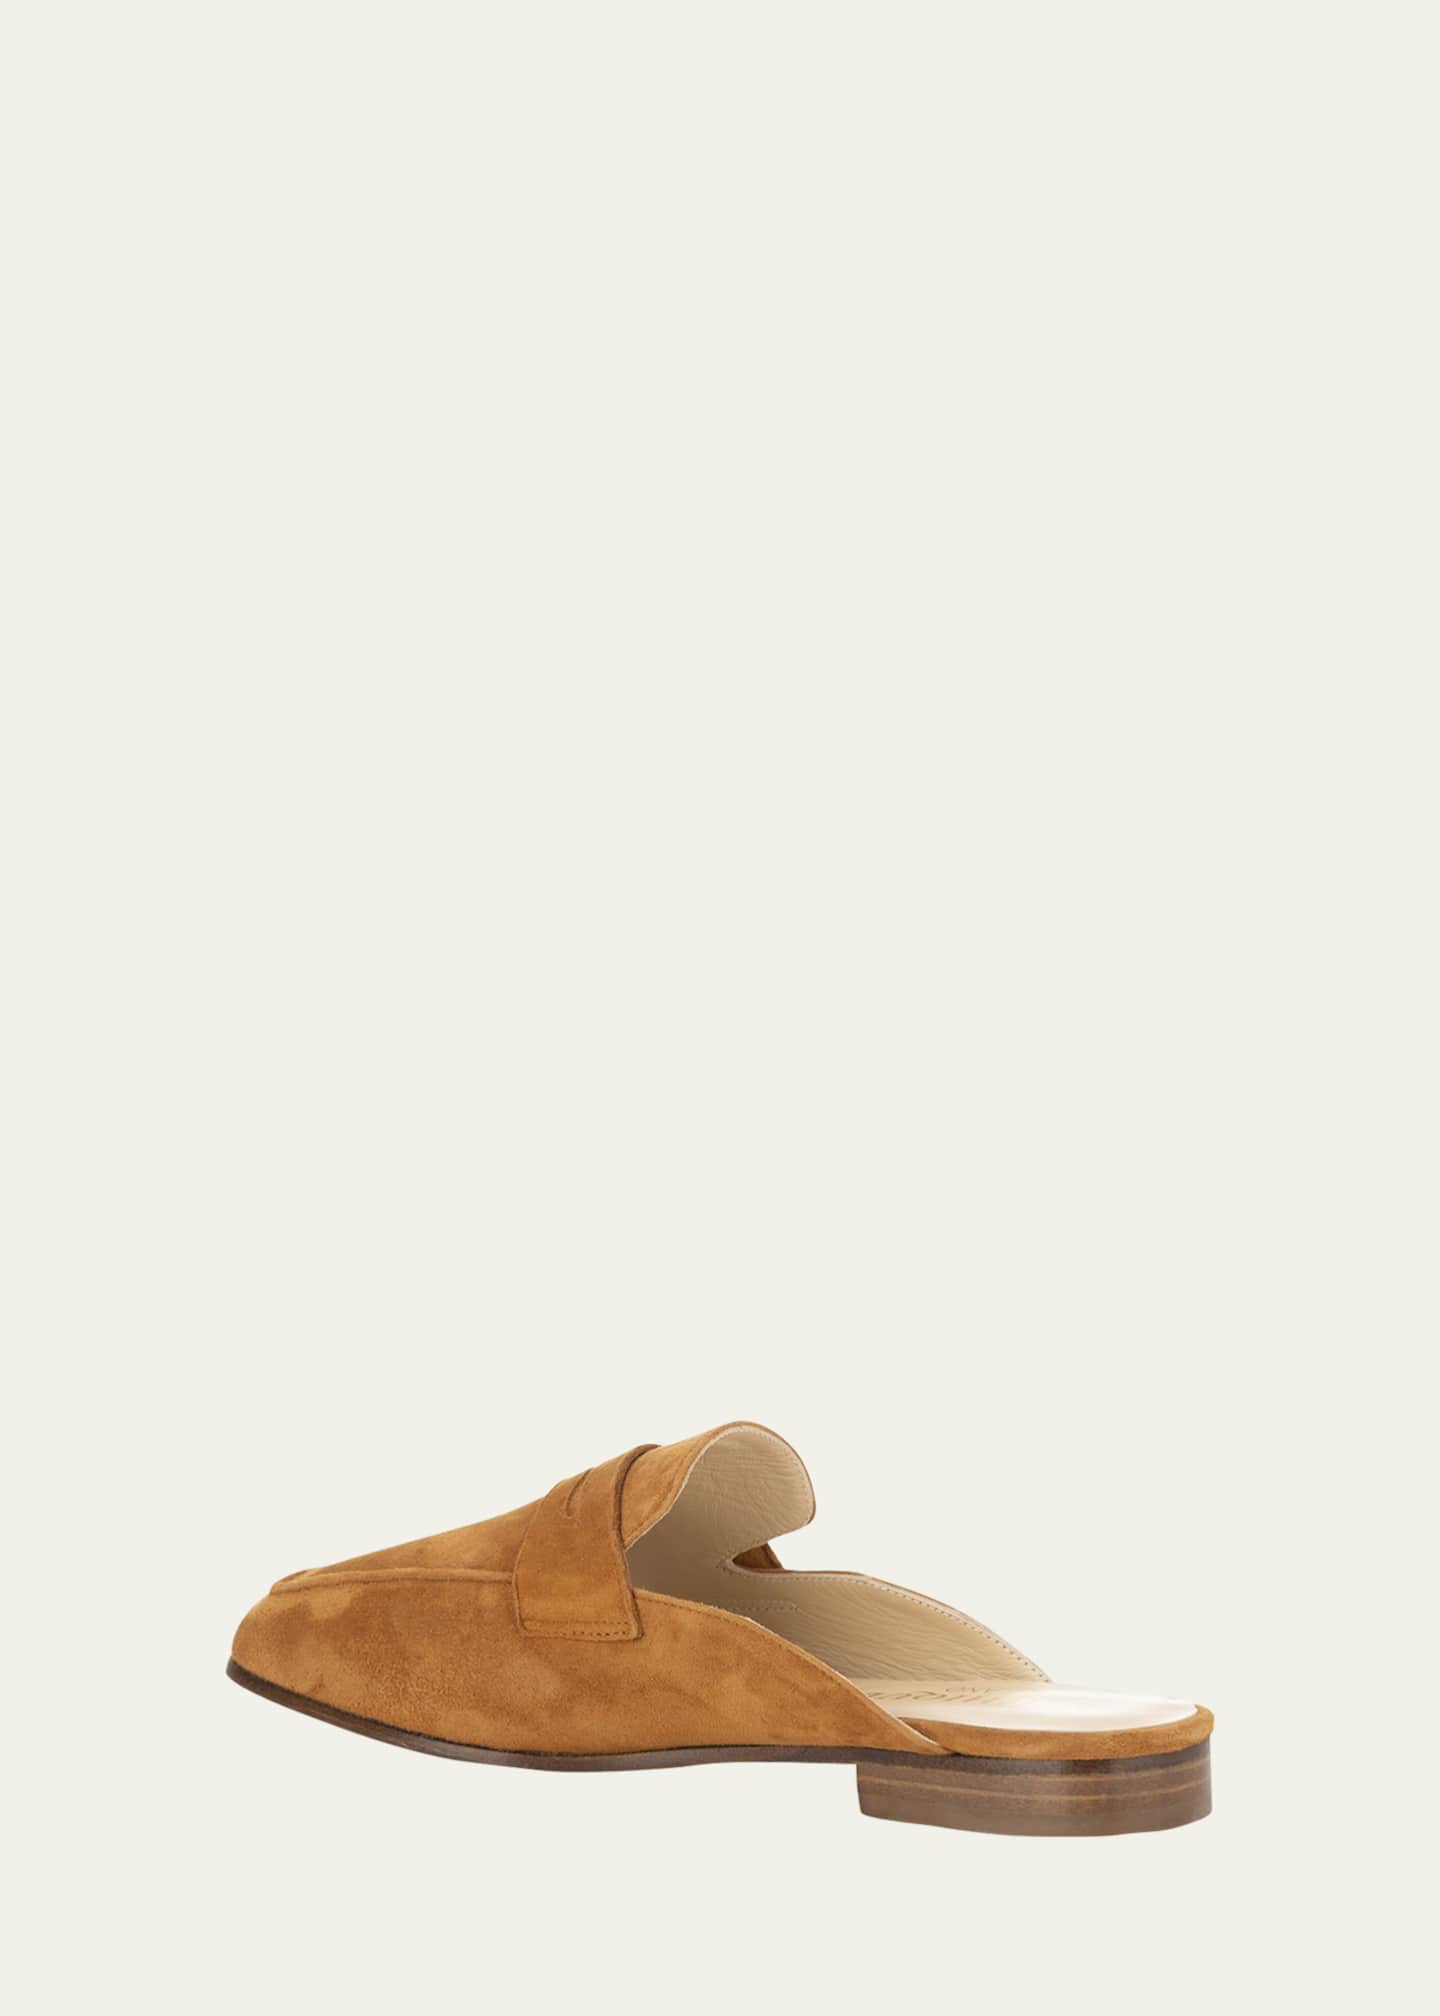 Sophique Riviera Suede Penny Loafer Mules - Bergdorf Goodman